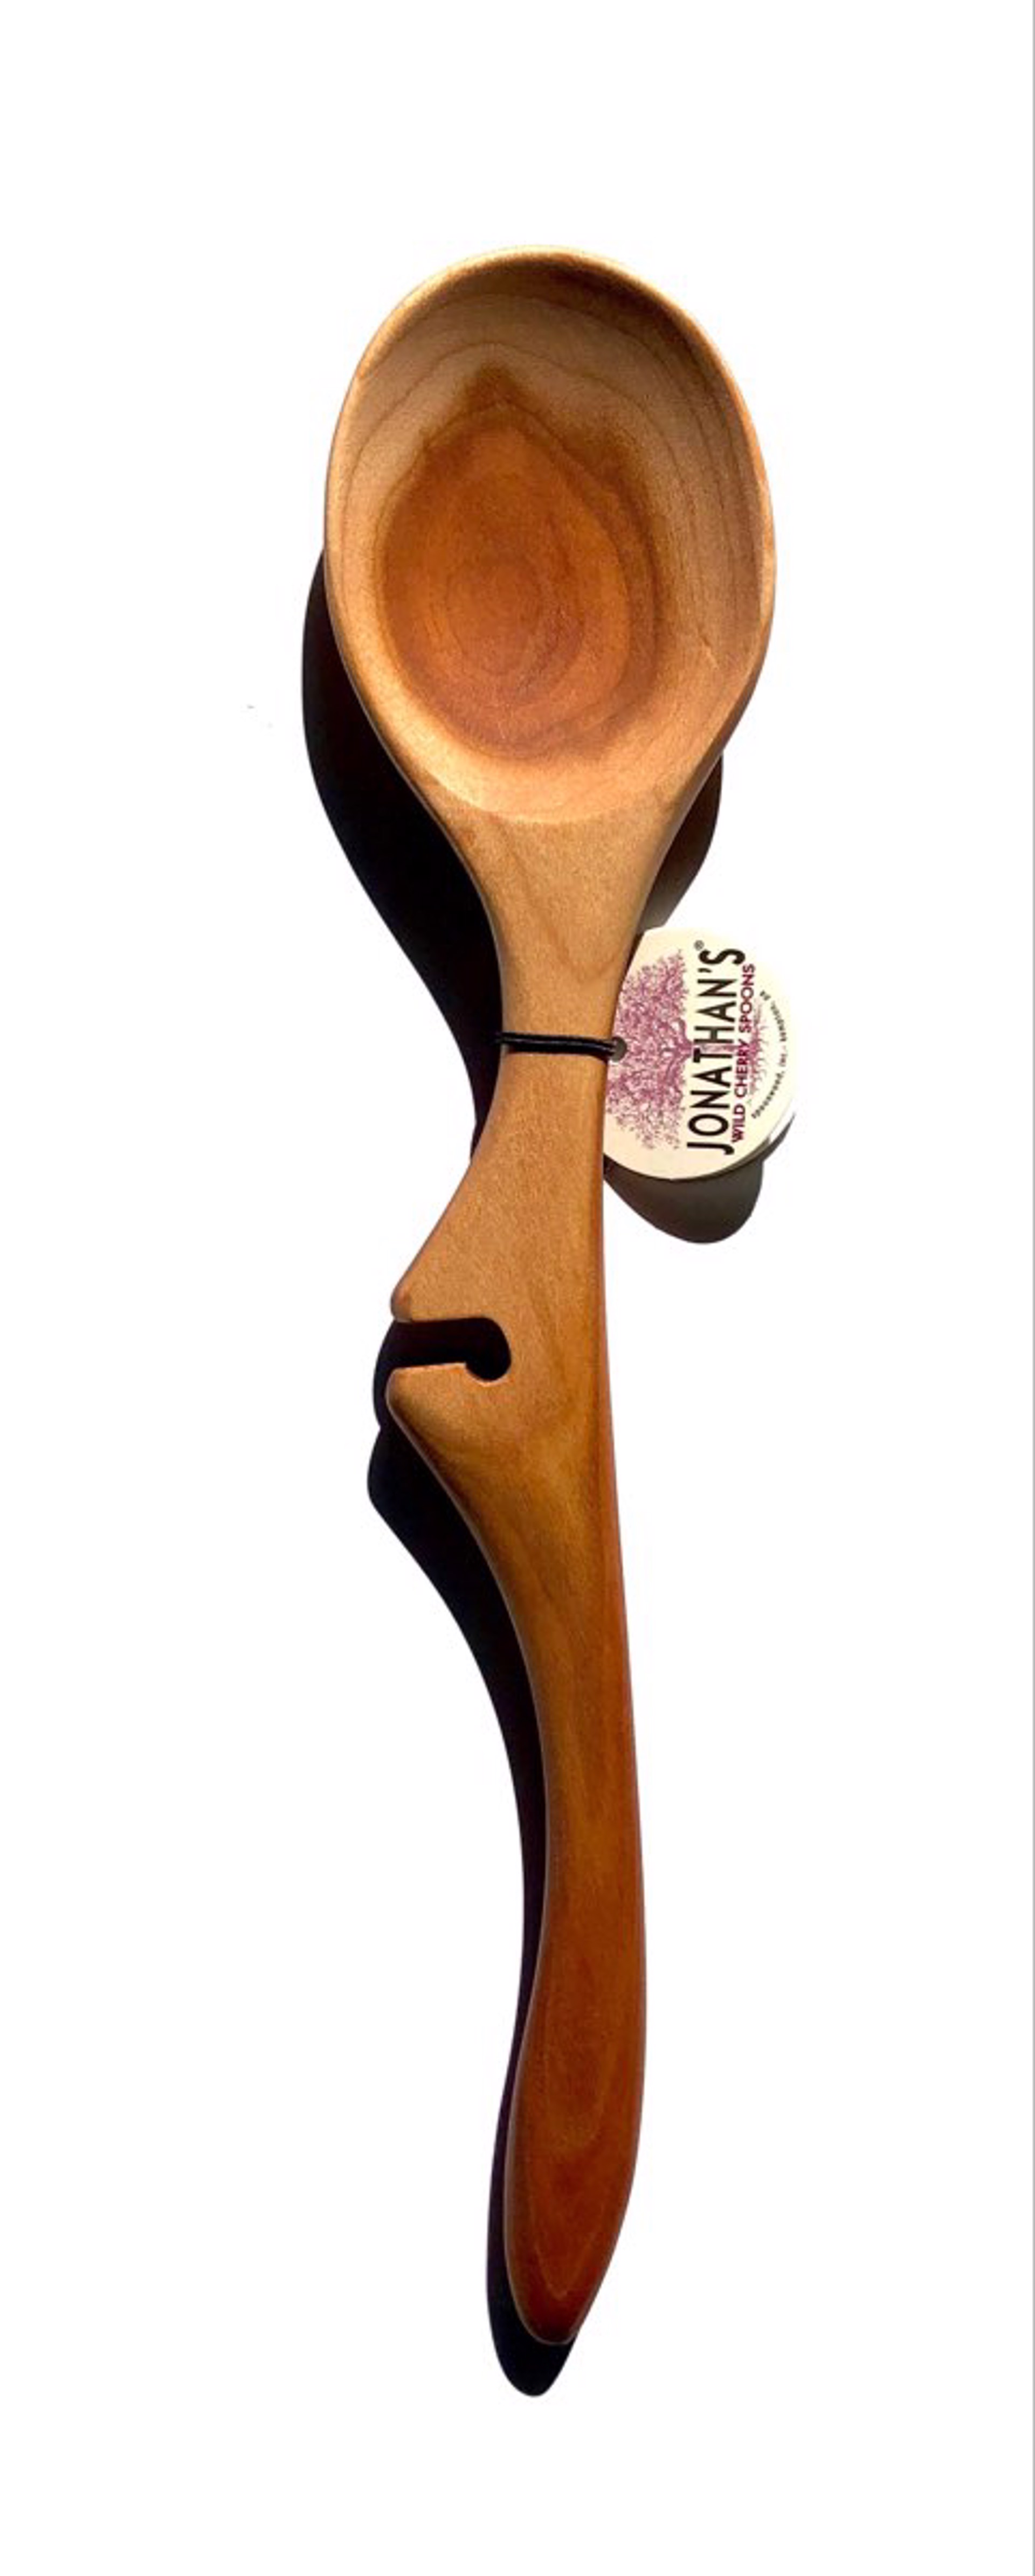 Original Lazy Spoon by Jonathan's Spoons